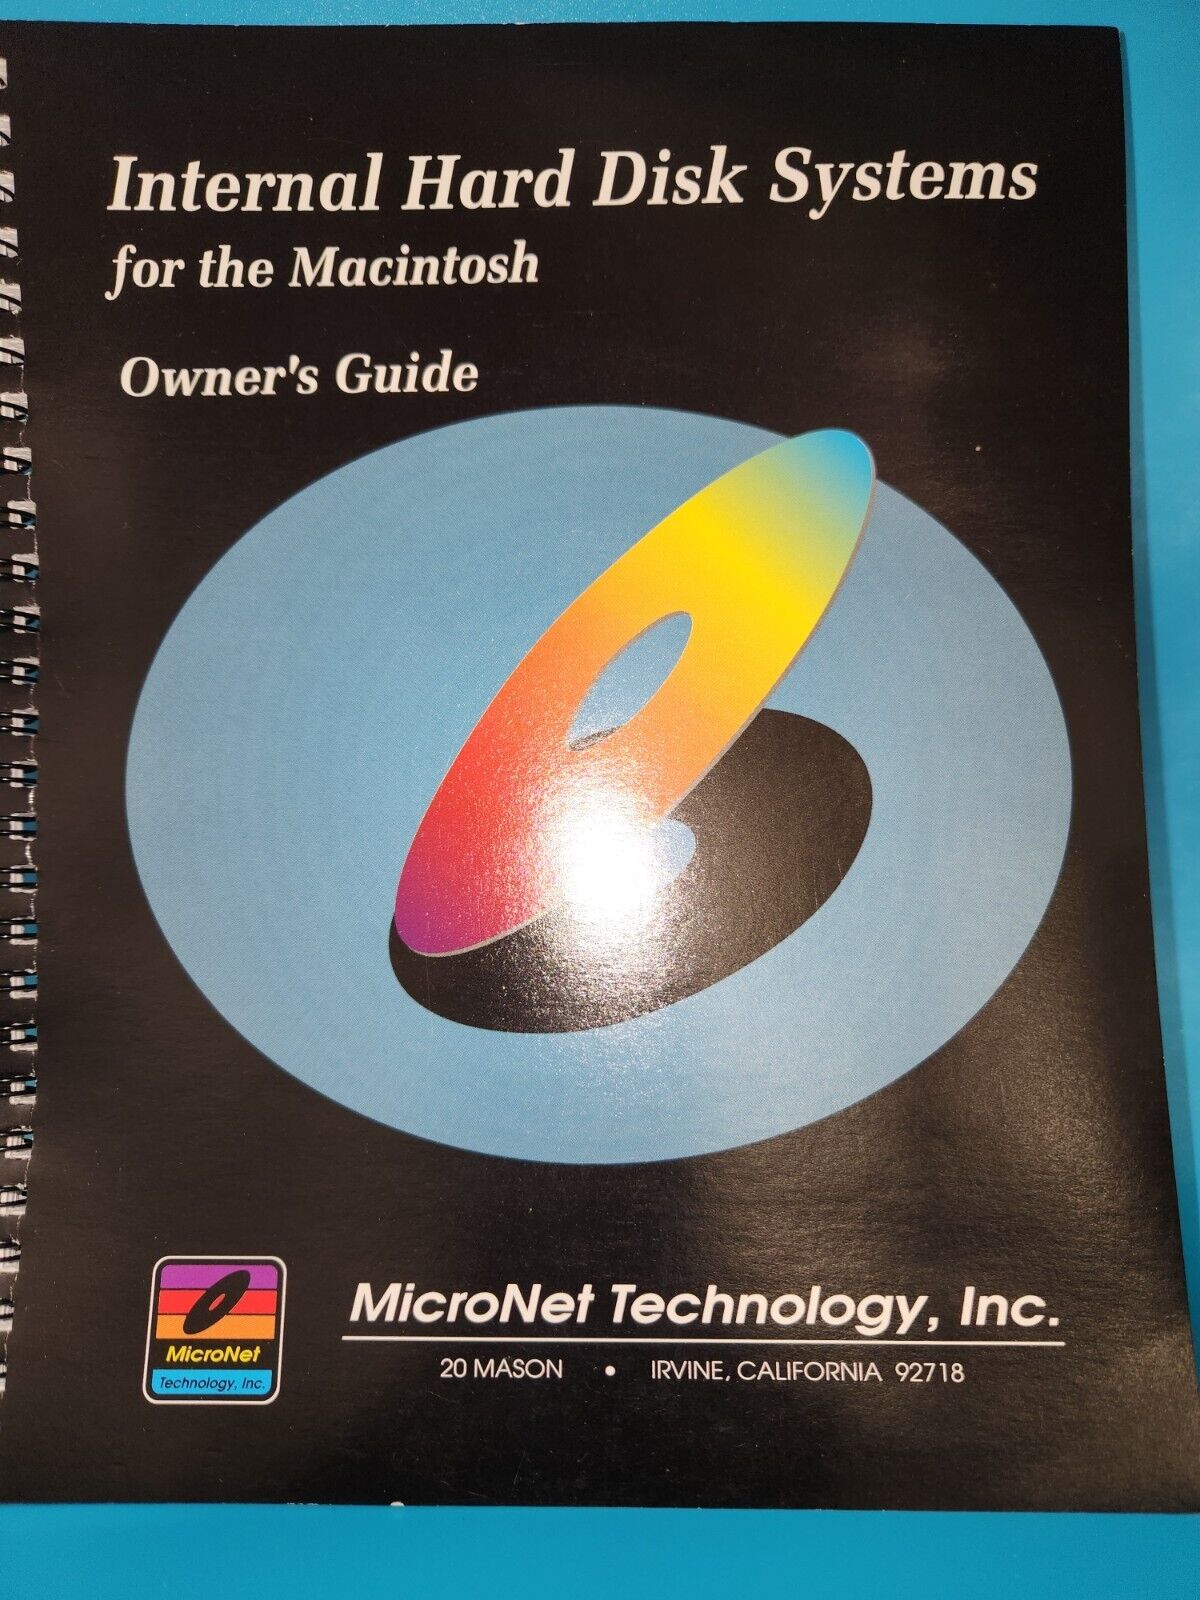 INTERNAL Hard Disk Systems for the Macintosh Owner's Guide (MicroNET, 1993) VTG